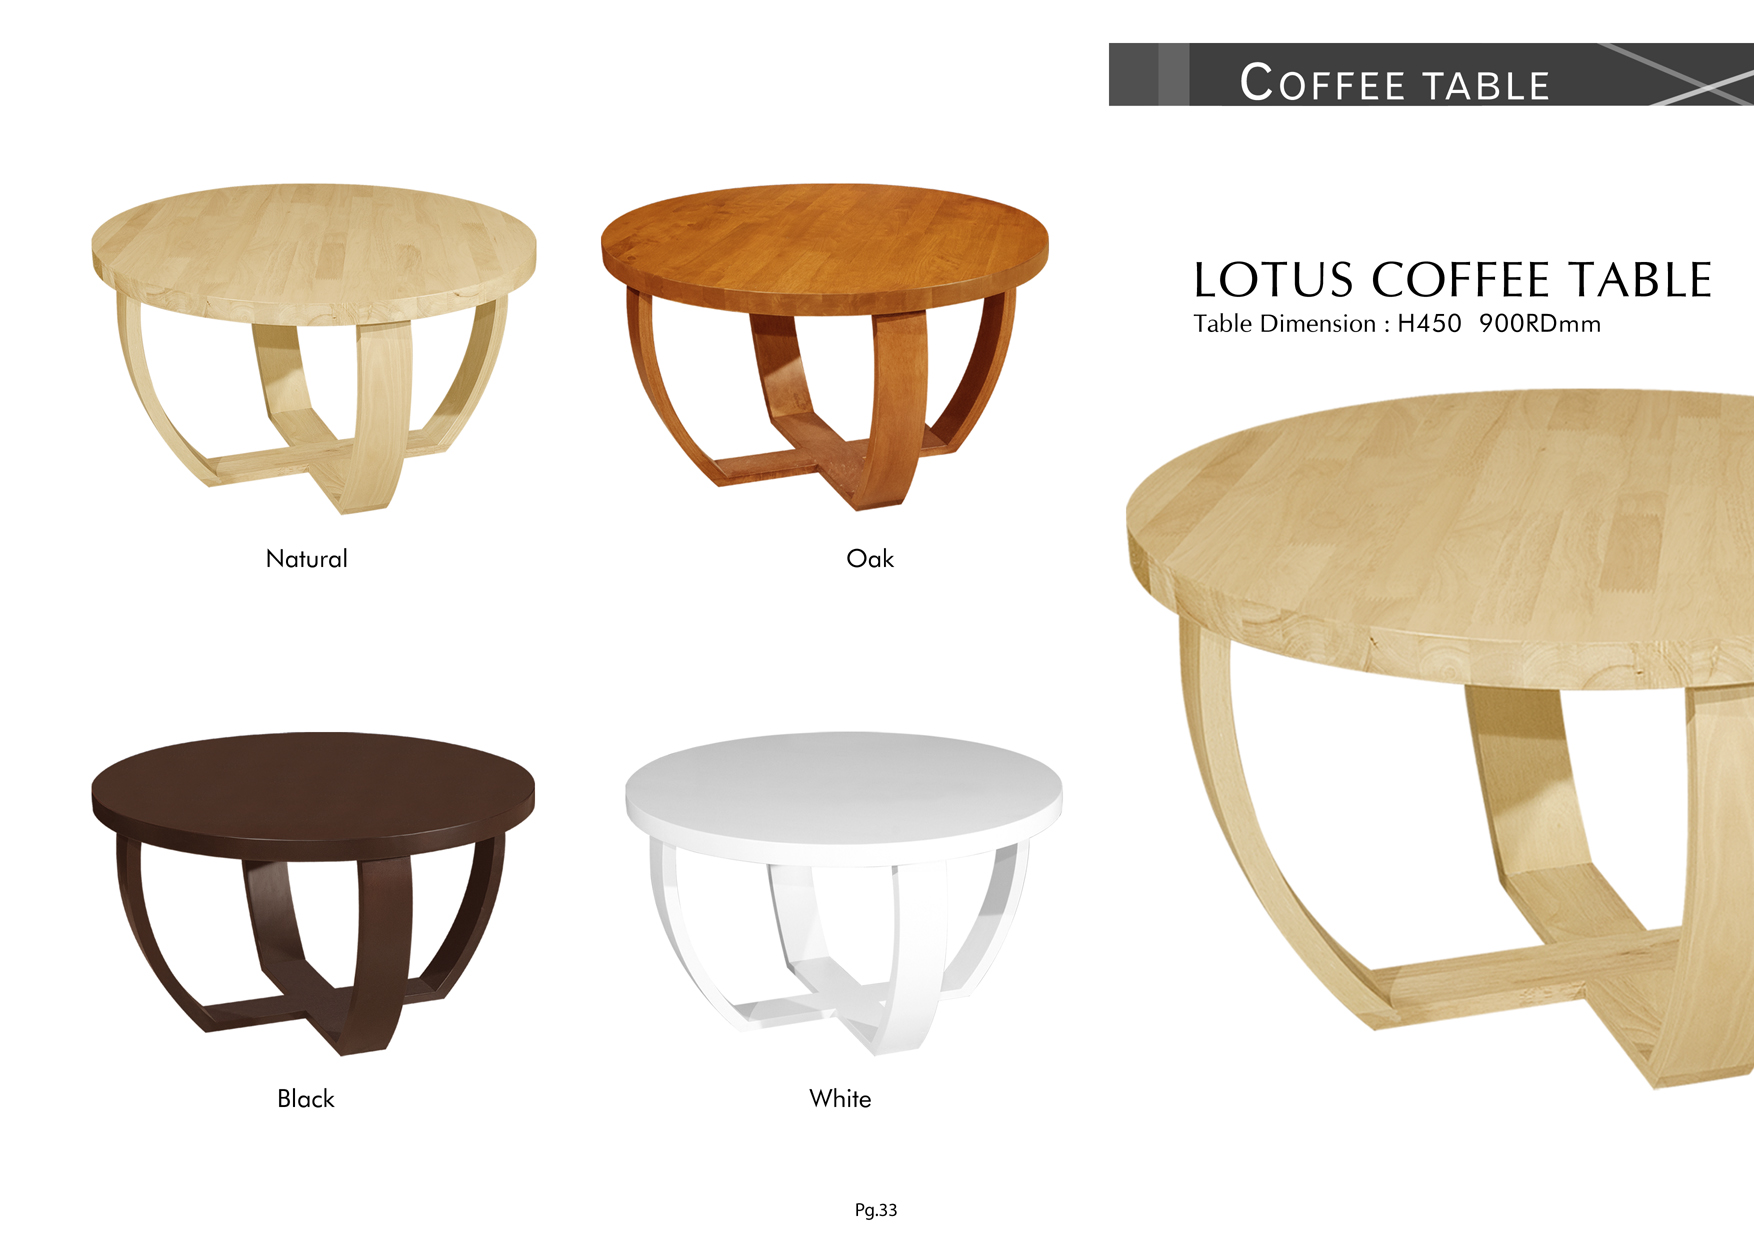 Product: PG33. LOTUS COFFEE TABLE